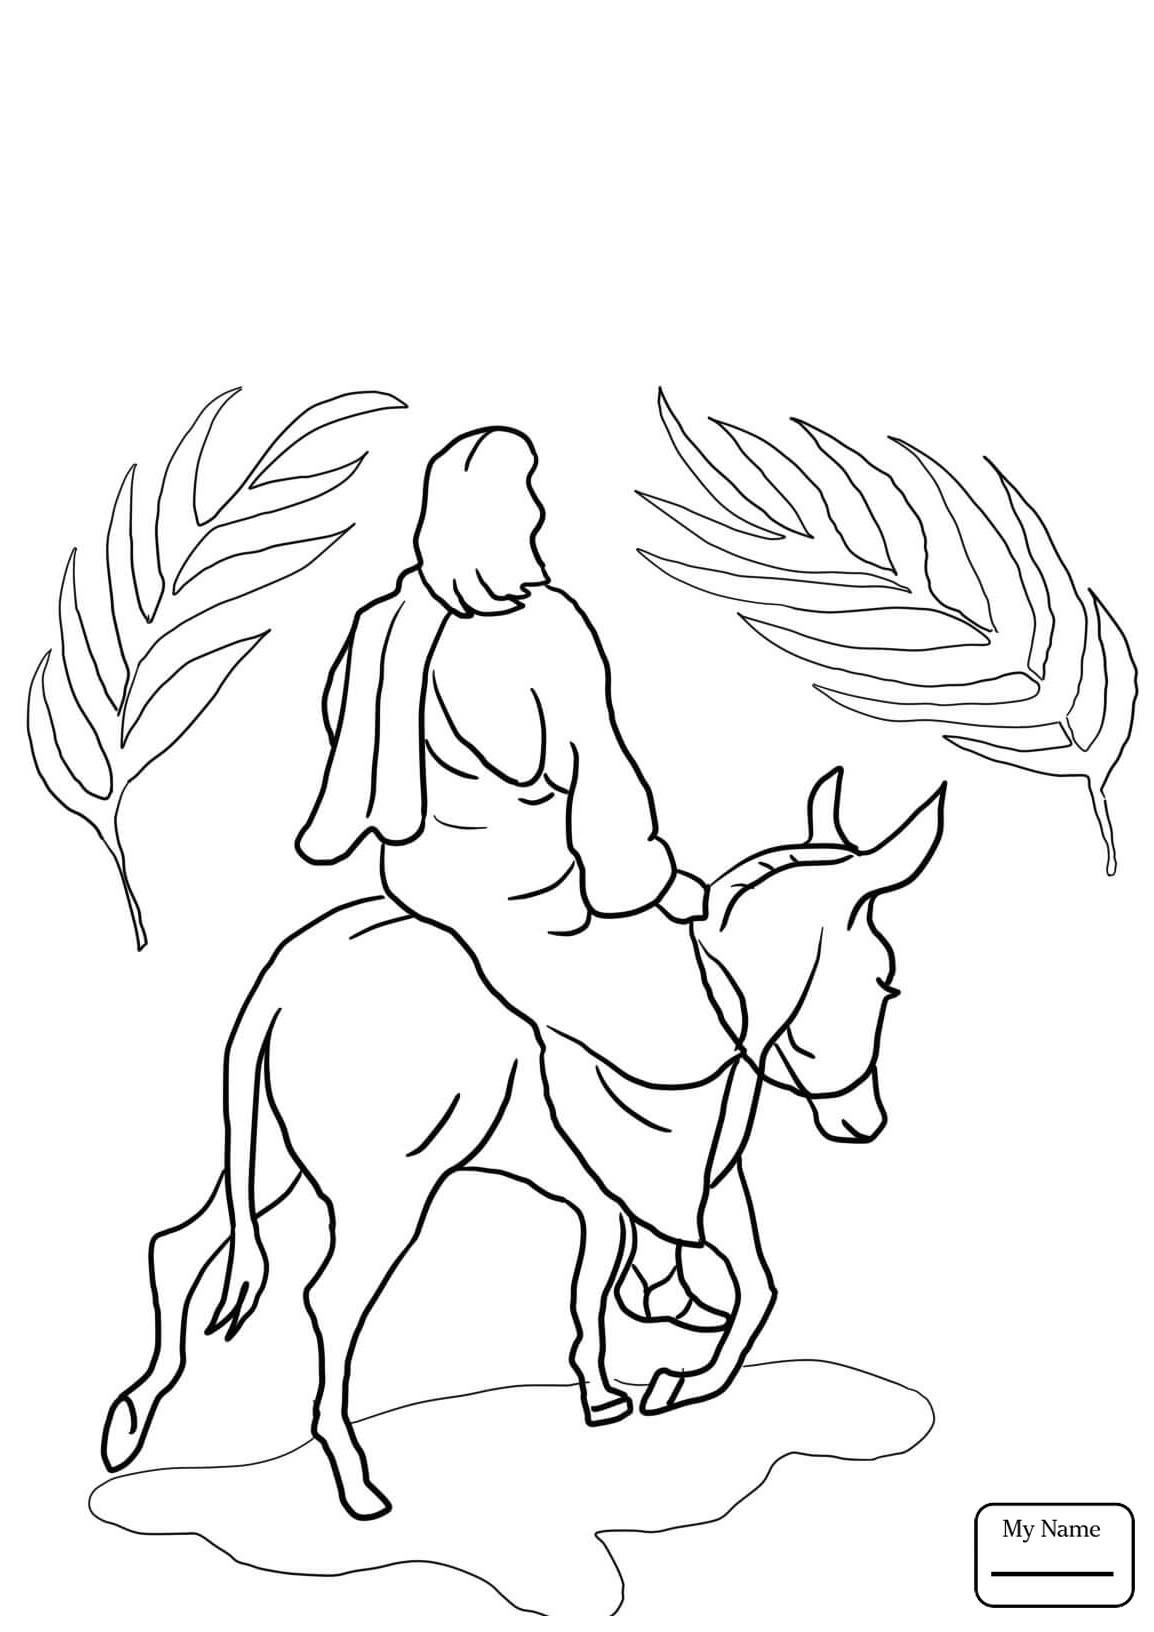 Palm Sunday Coloring Pages To Print Coloring Jesus Blind Bible Heals